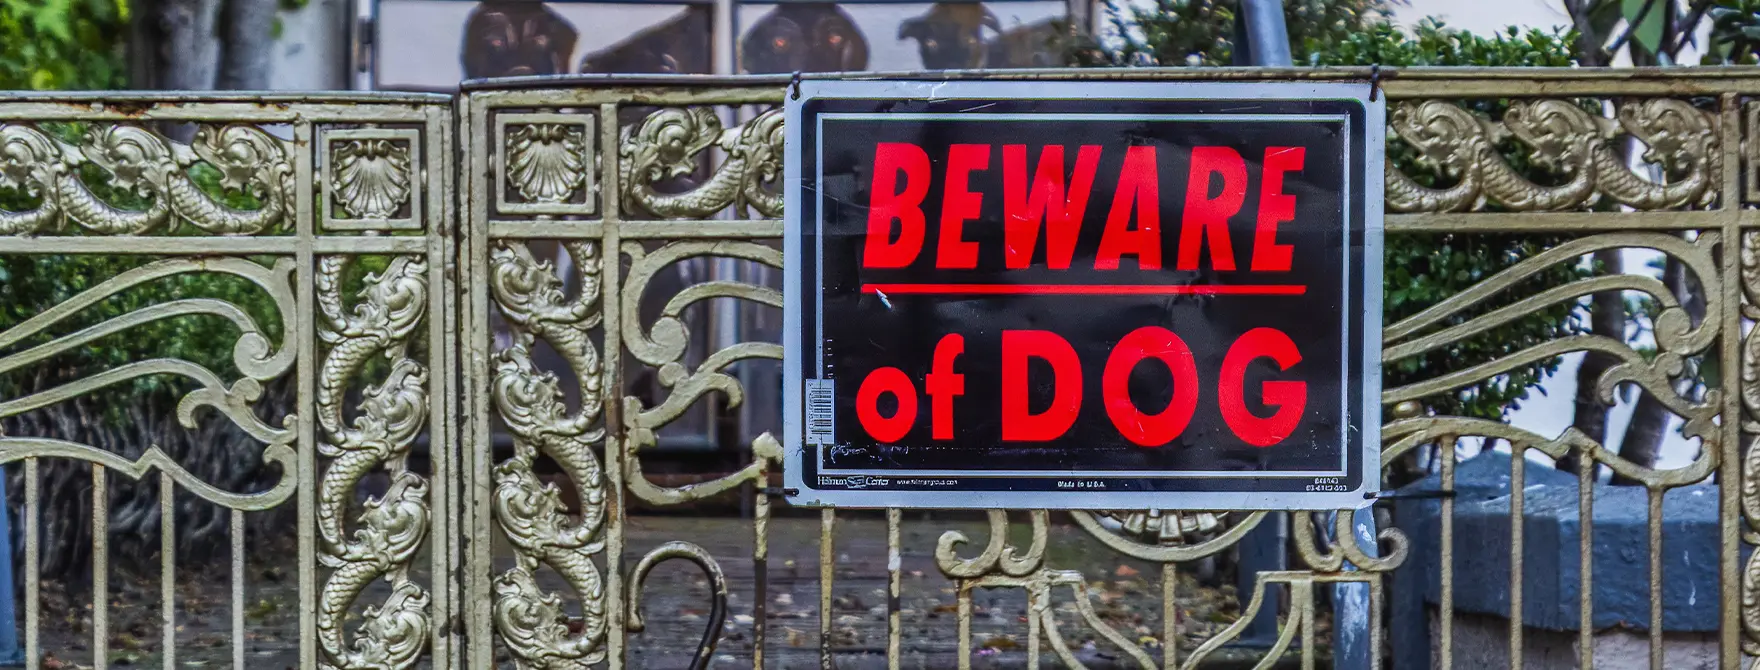 A "Beware of Dog" sign on a metal fence